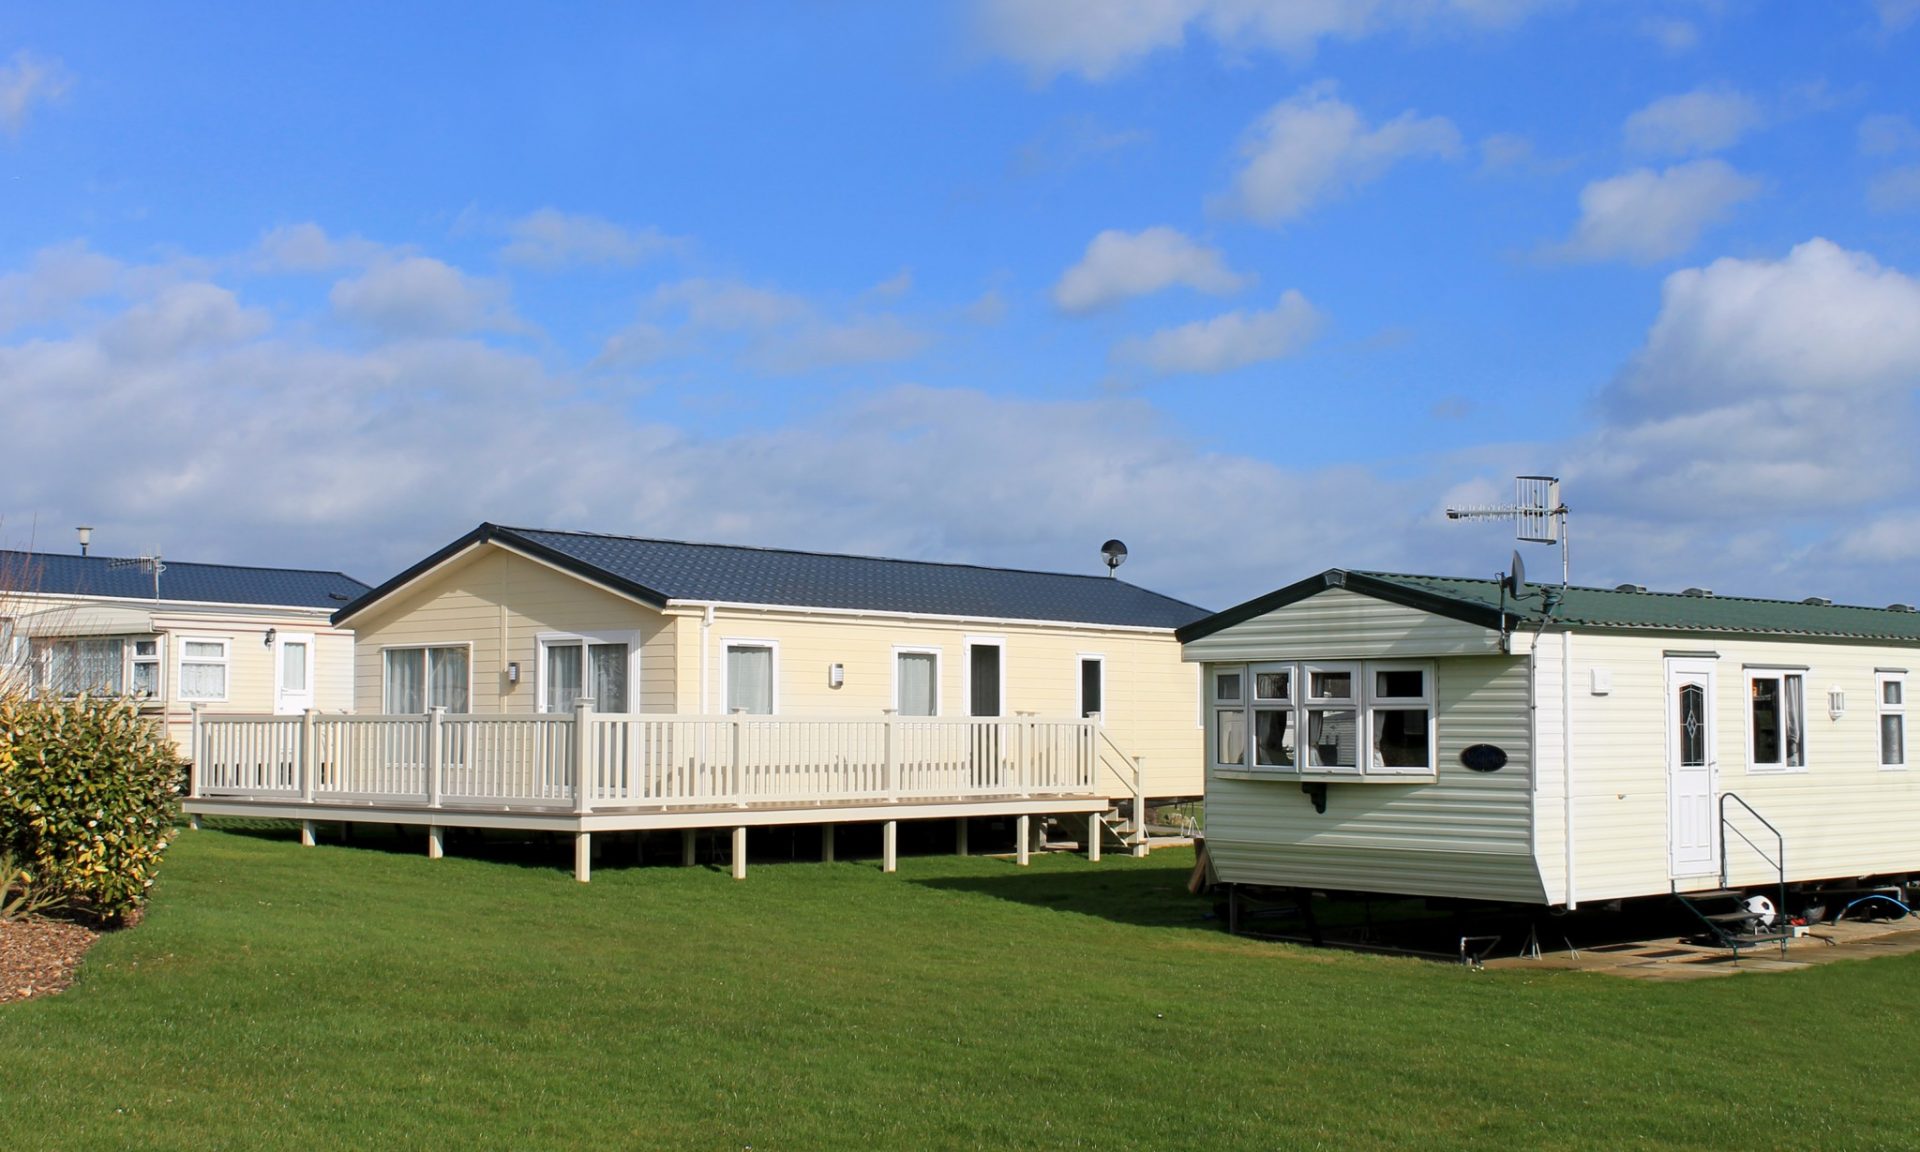 Manufactured & Mobile Home Insurance: A Complete Guide - NerdWallet